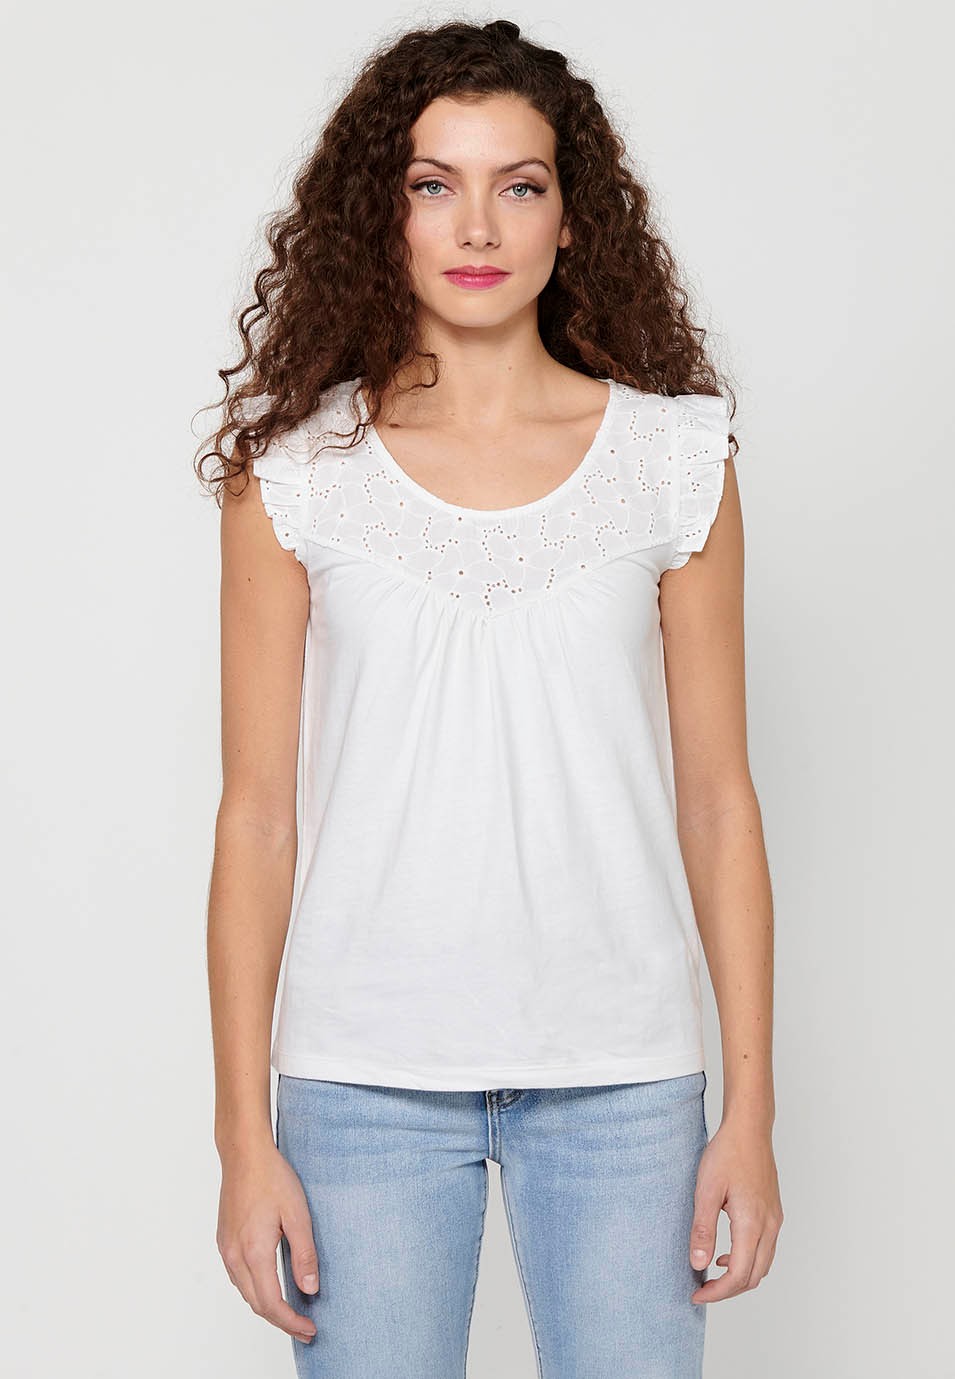 Women's White Round Neck Short Sleeve T-shirt with Ruffle on the Shoulders 4